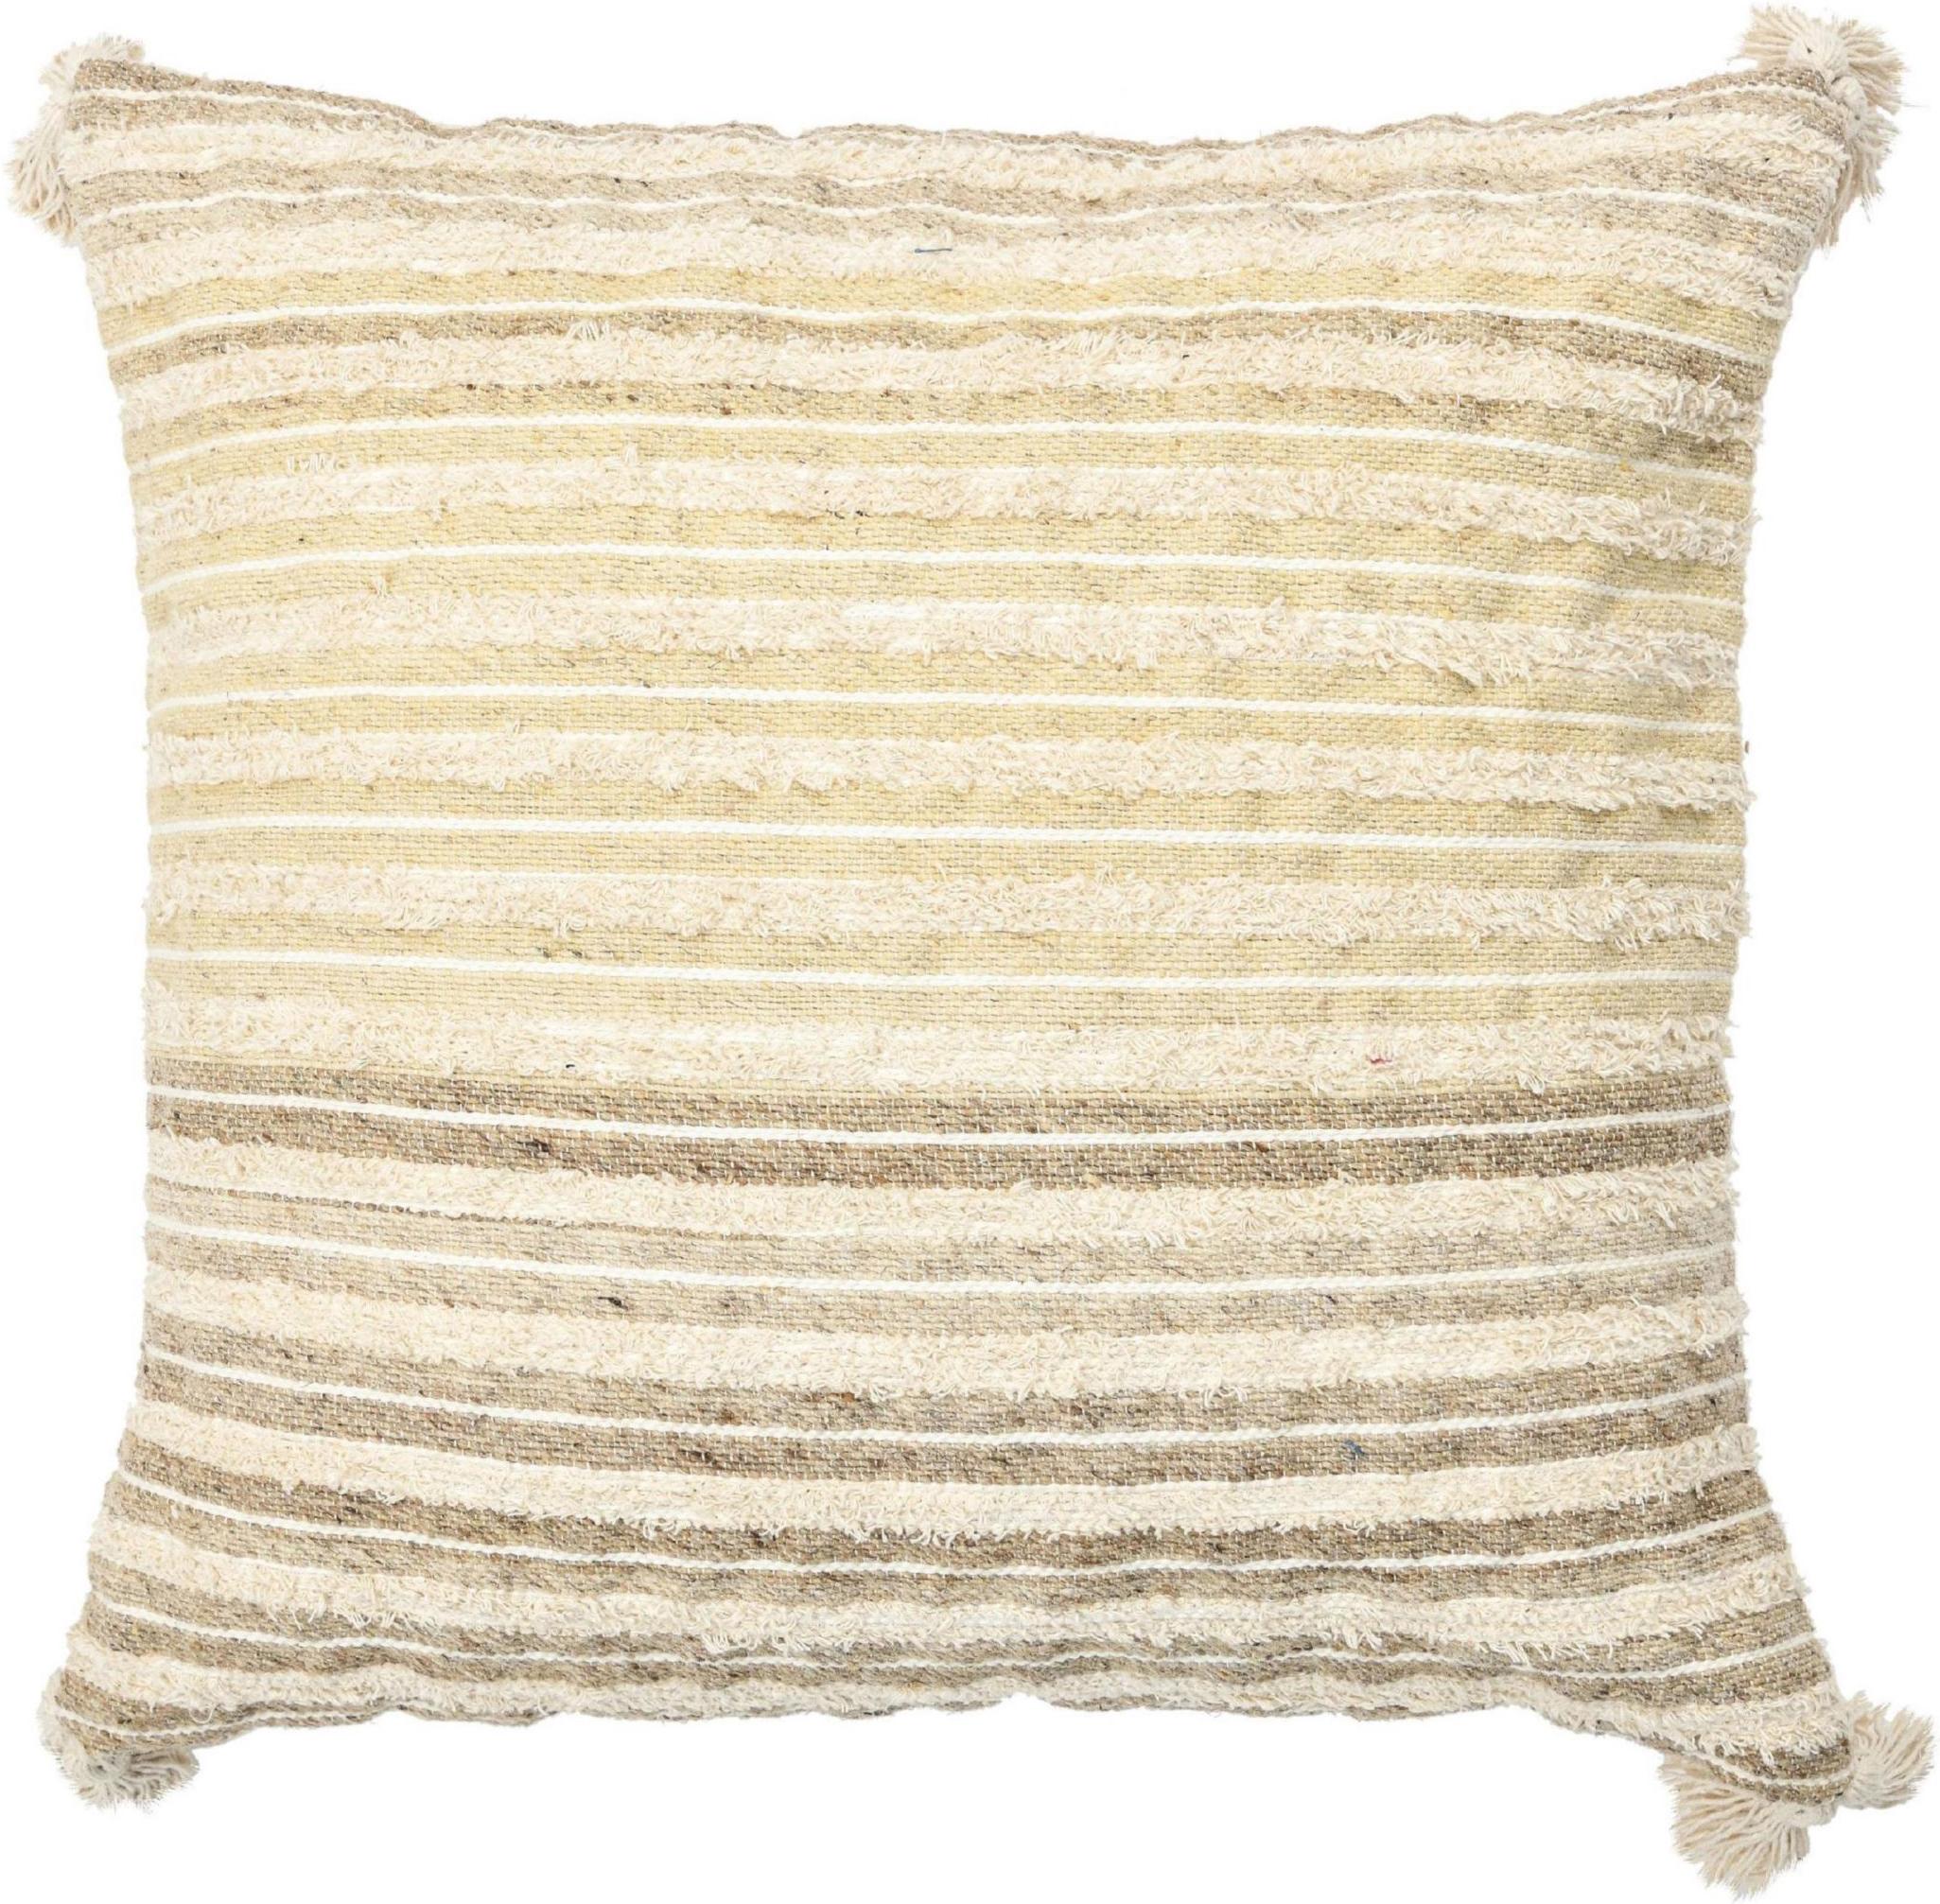 Indian Boho Chic Style Modern Wool and Cotton Pillow In Beige For Sale